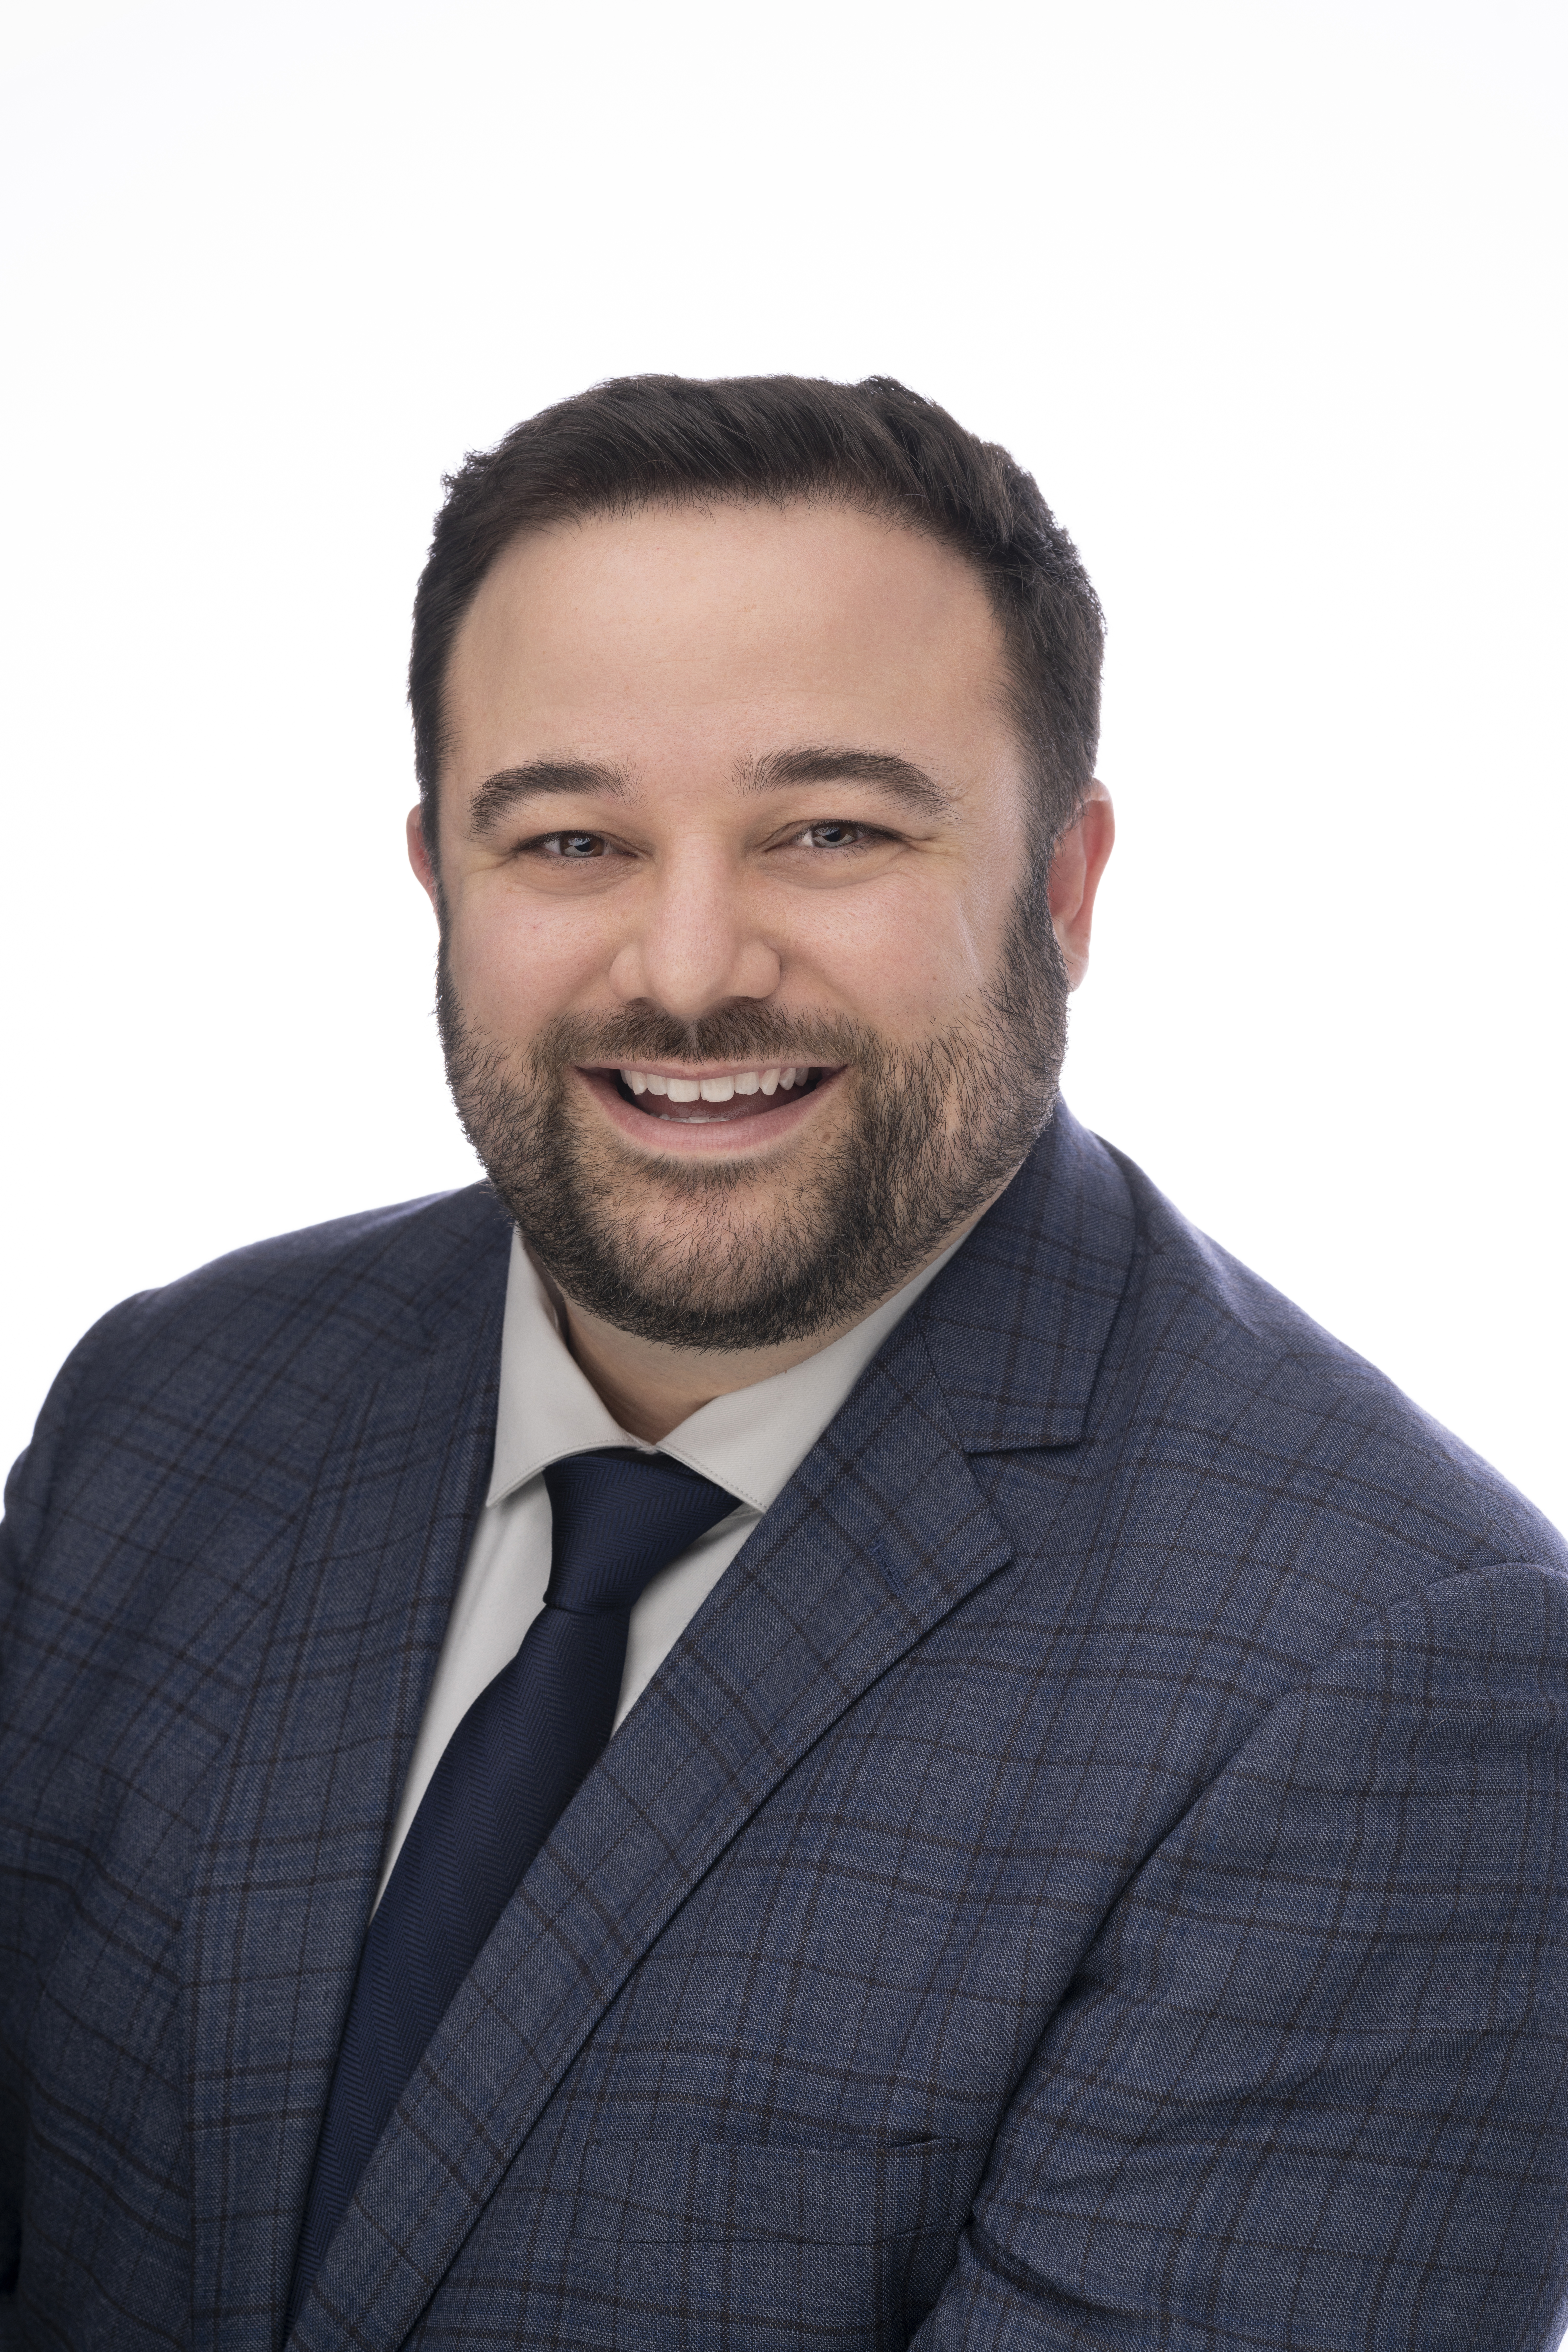 Liz Moore & Associates Appoints Current REALTOR Jake Evans as New Director of Operations